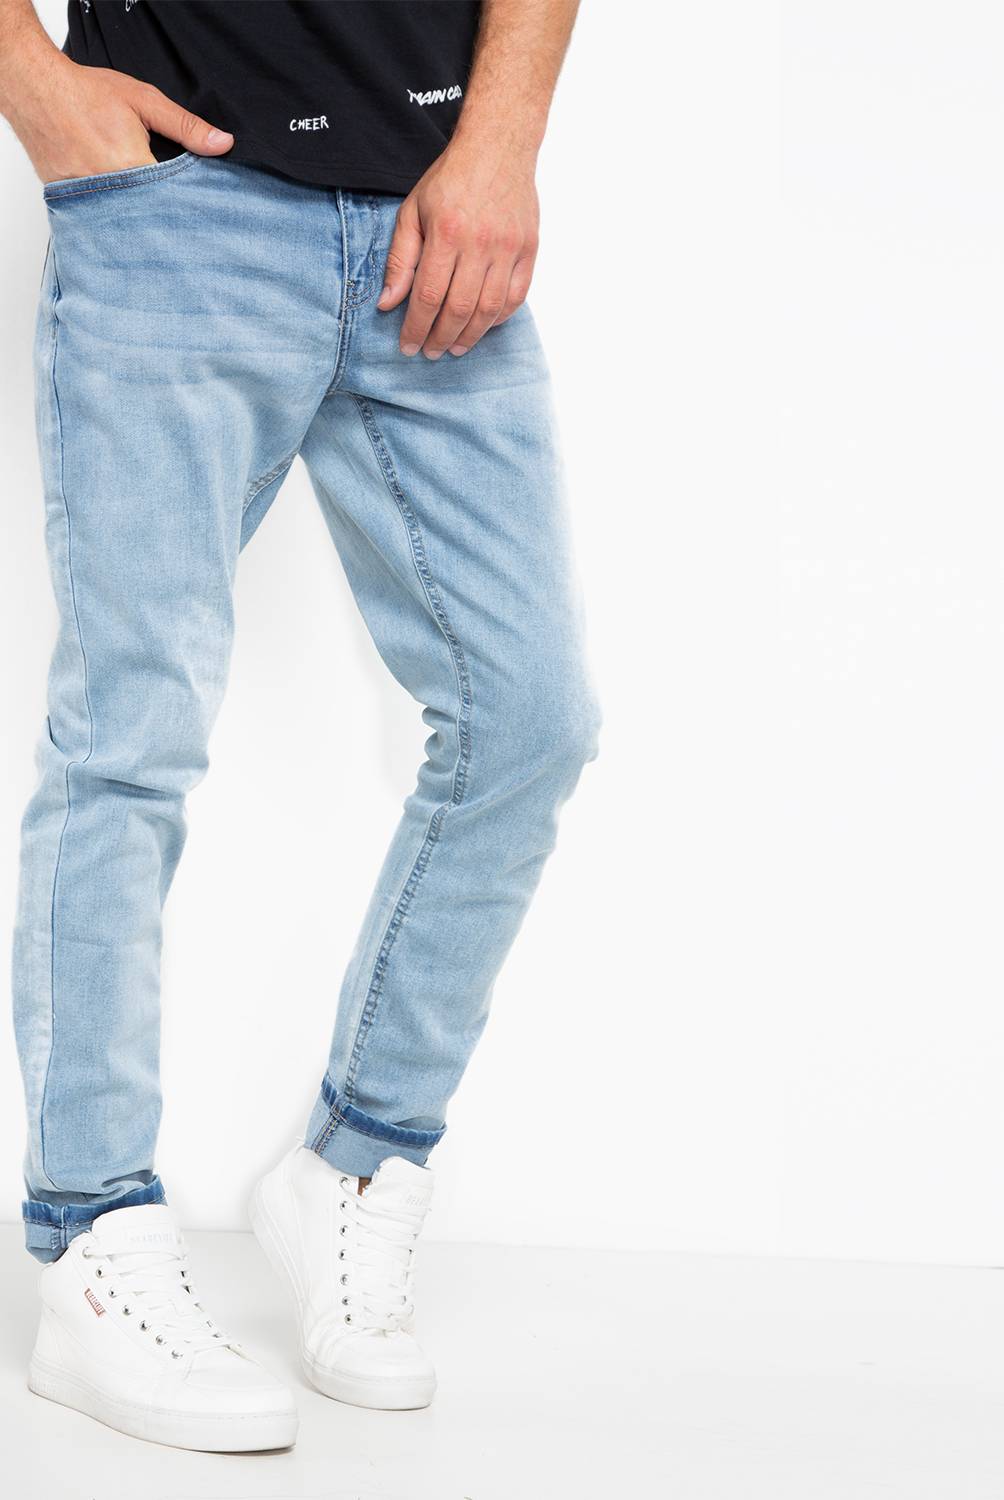 BEARCLIFF - Jeans Basico Super Skinyy Hombre Bearcliff